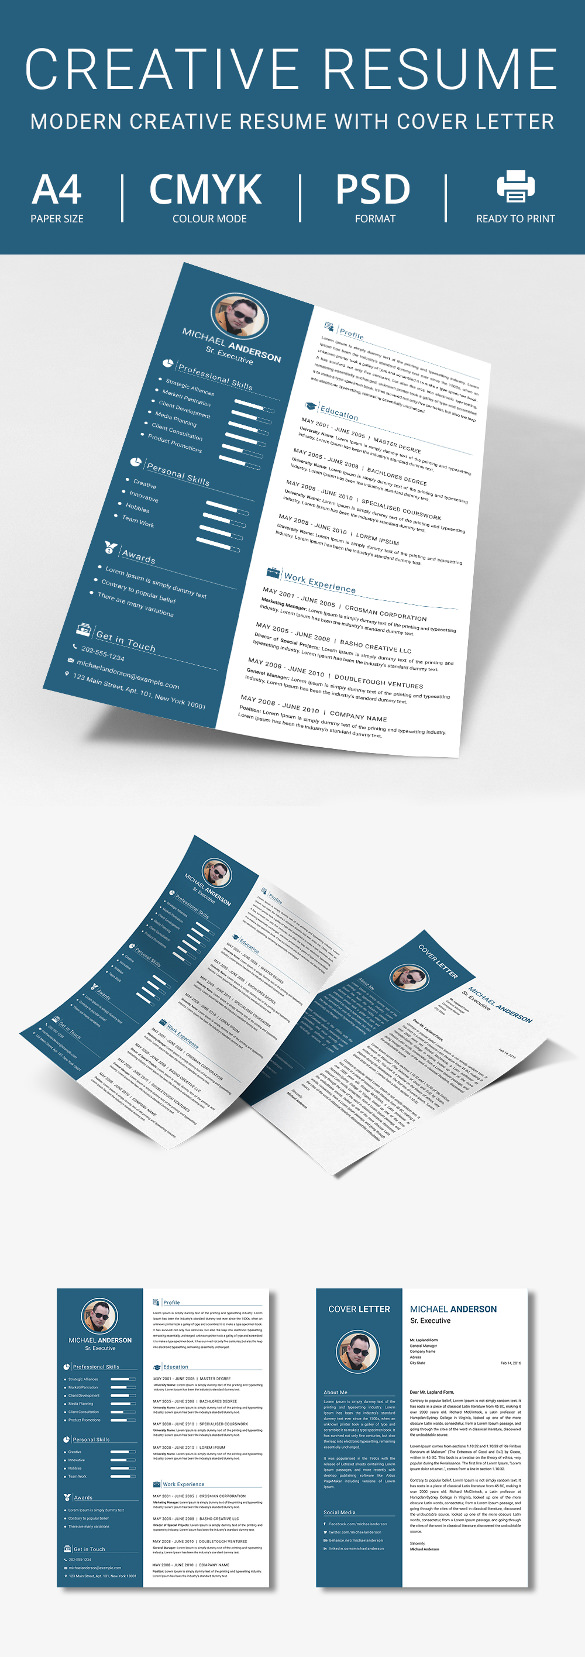 Reverse chronological resume template download 2020